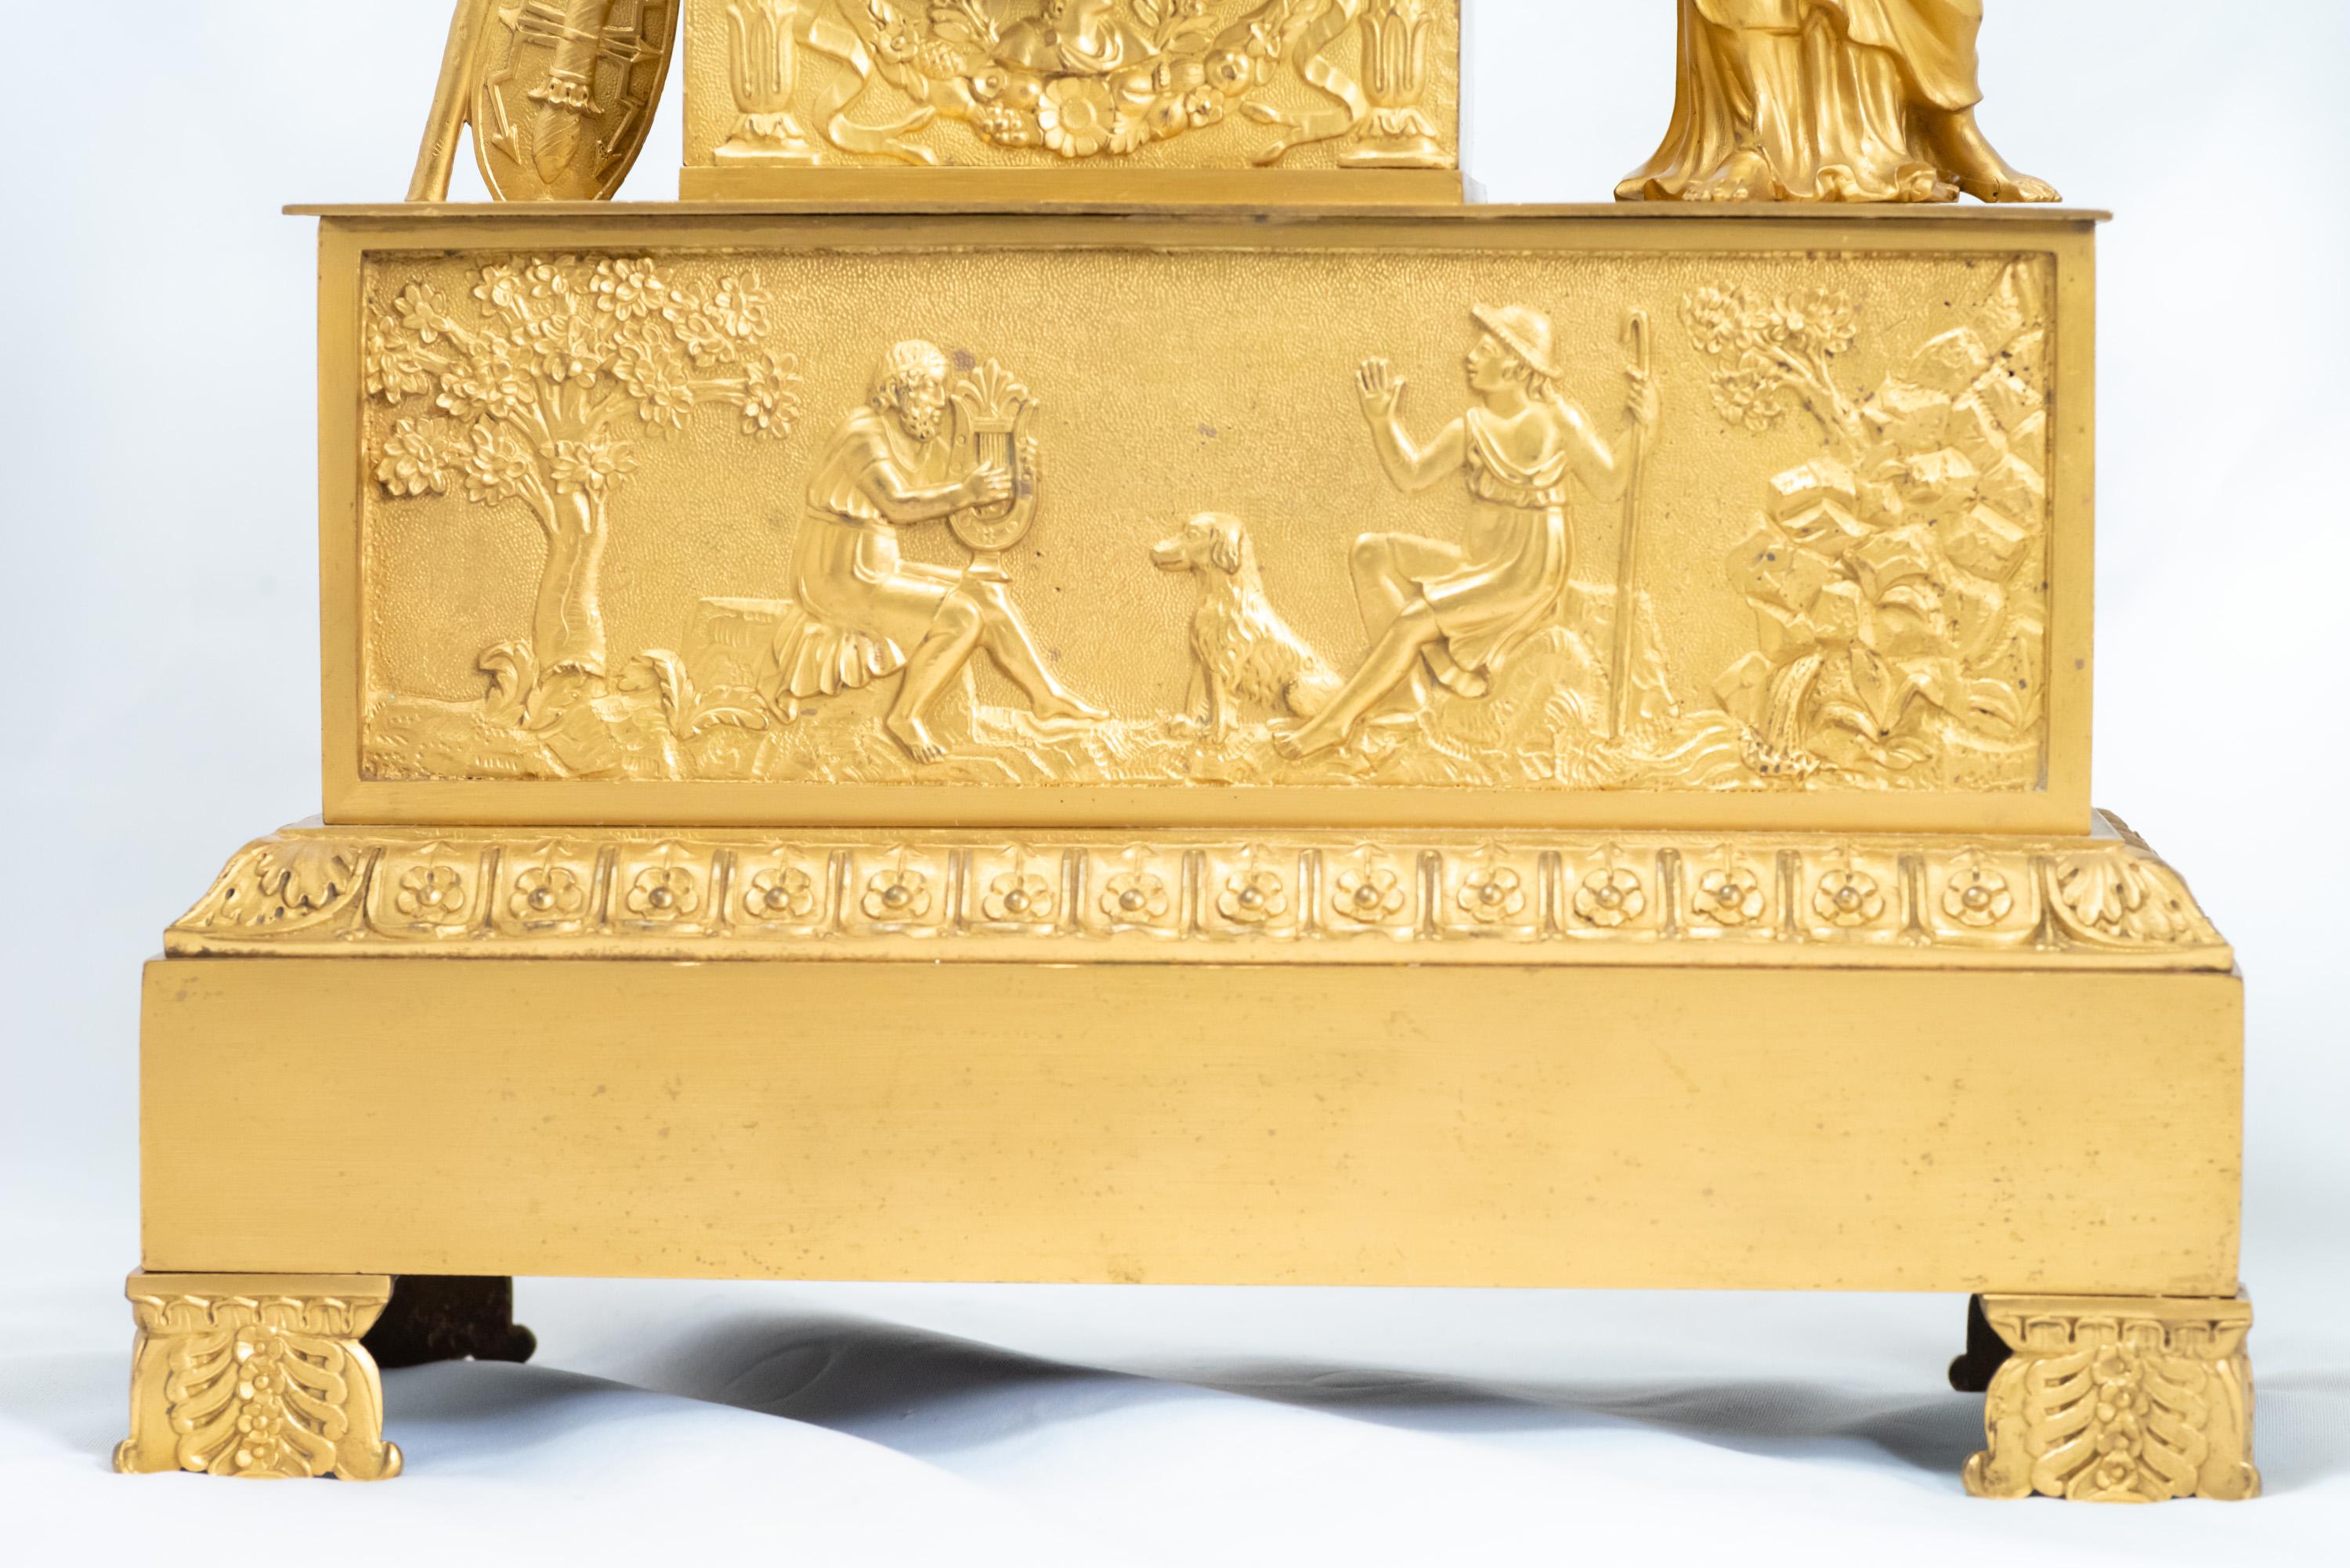 A Restauration Era Fire-Gilt Mantle Clock with Figures of Venus and Cupid For Sale 3